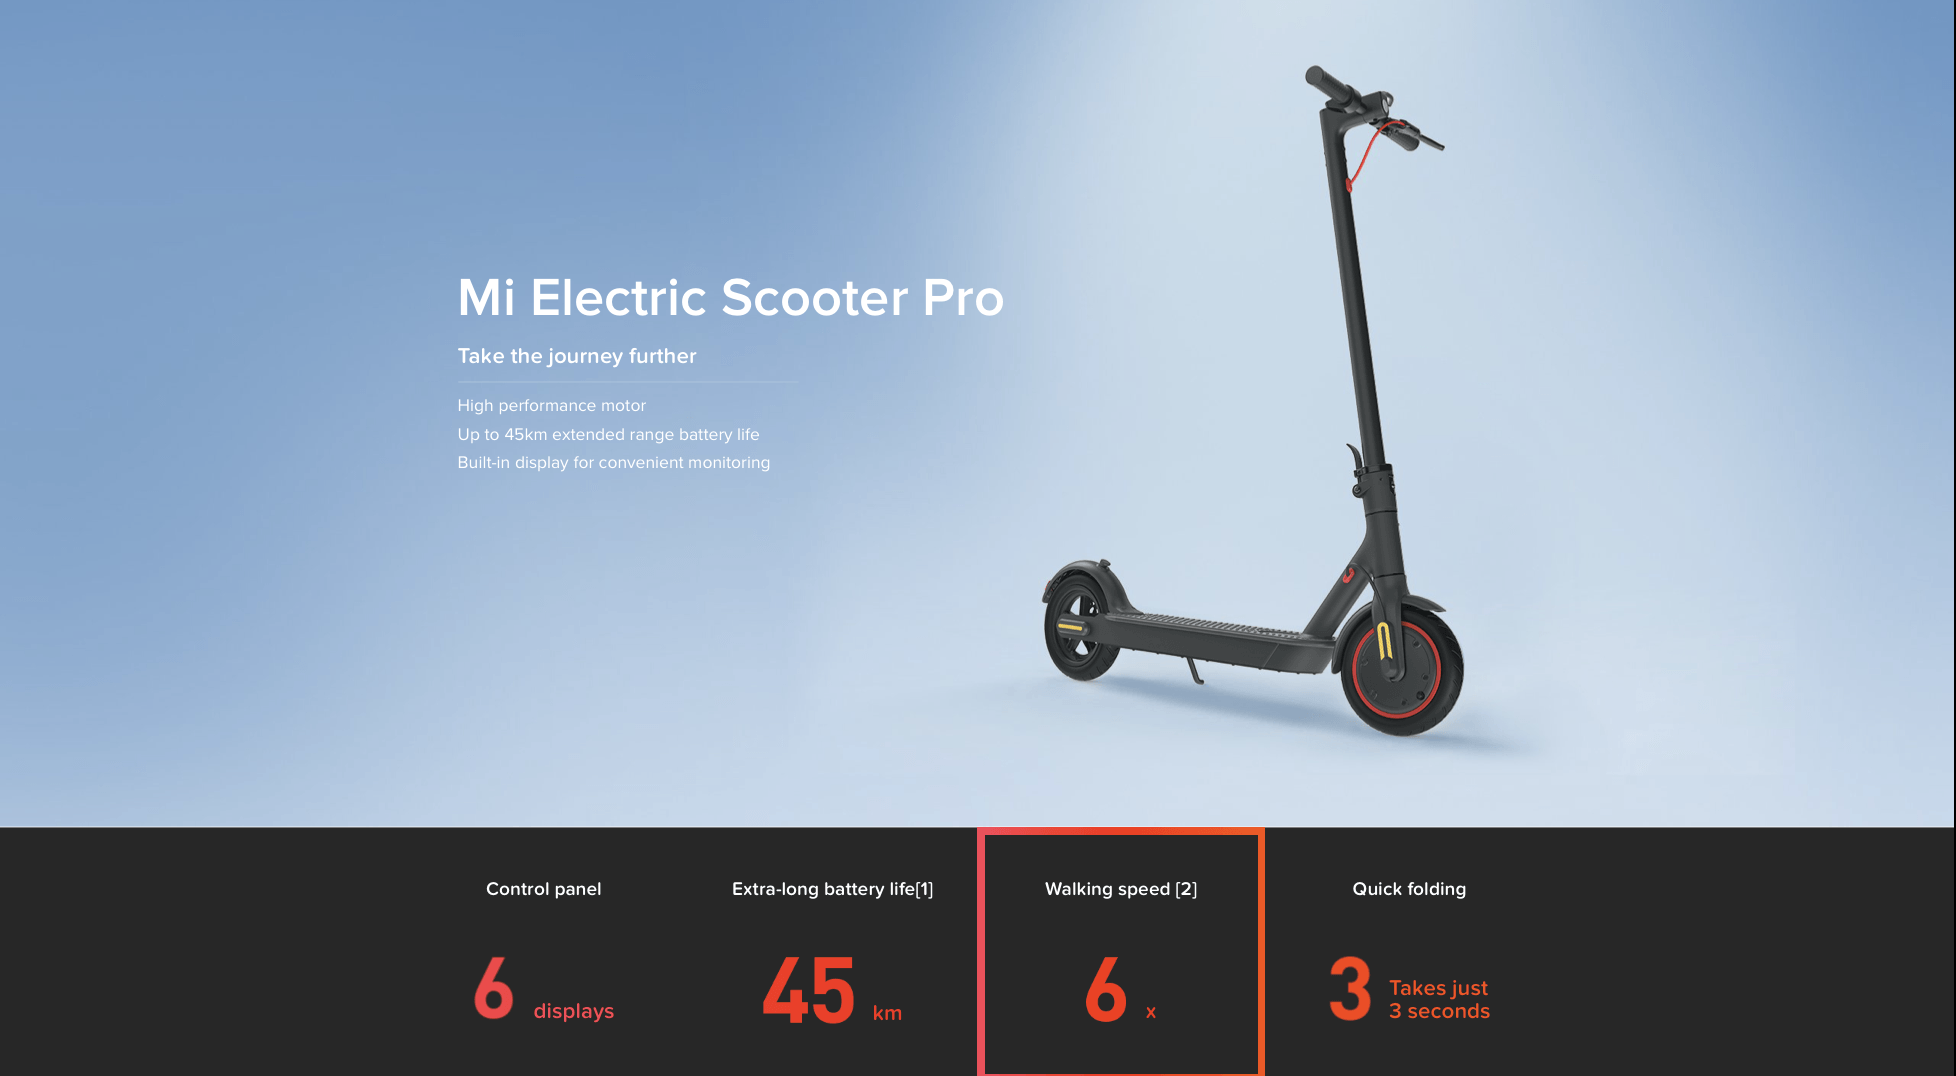 Xiaomi Mijia Electric Scooter 1S is the new electric scooter with more power, autonomy and new screen